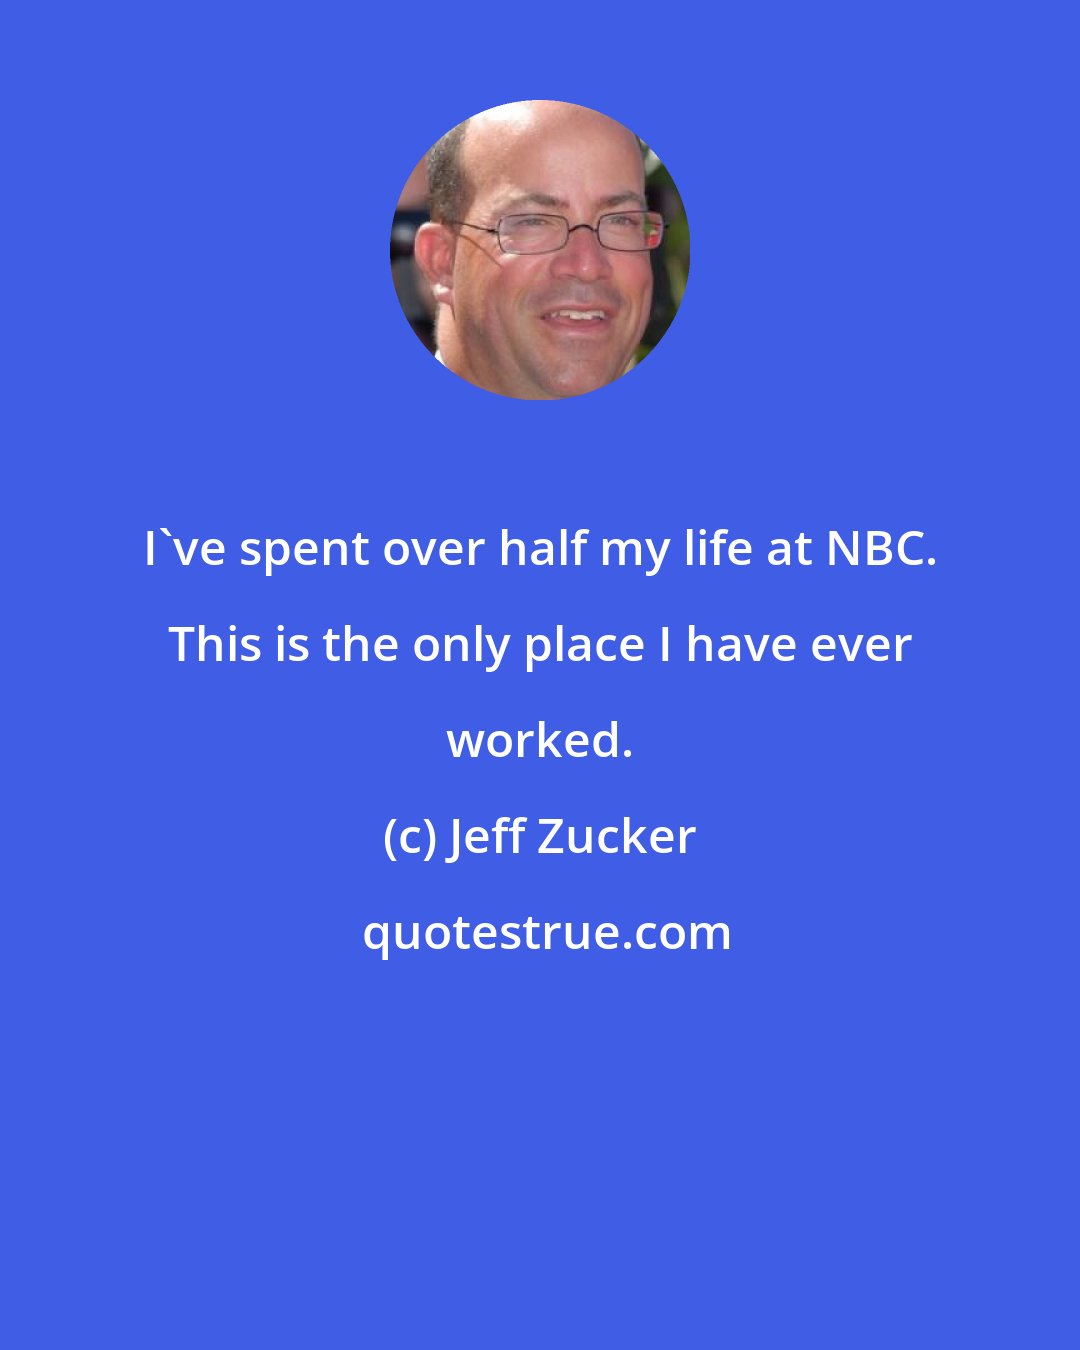 Jeff Zucker: I've spent over half my life at NBC. This is the only place I have ever worked.